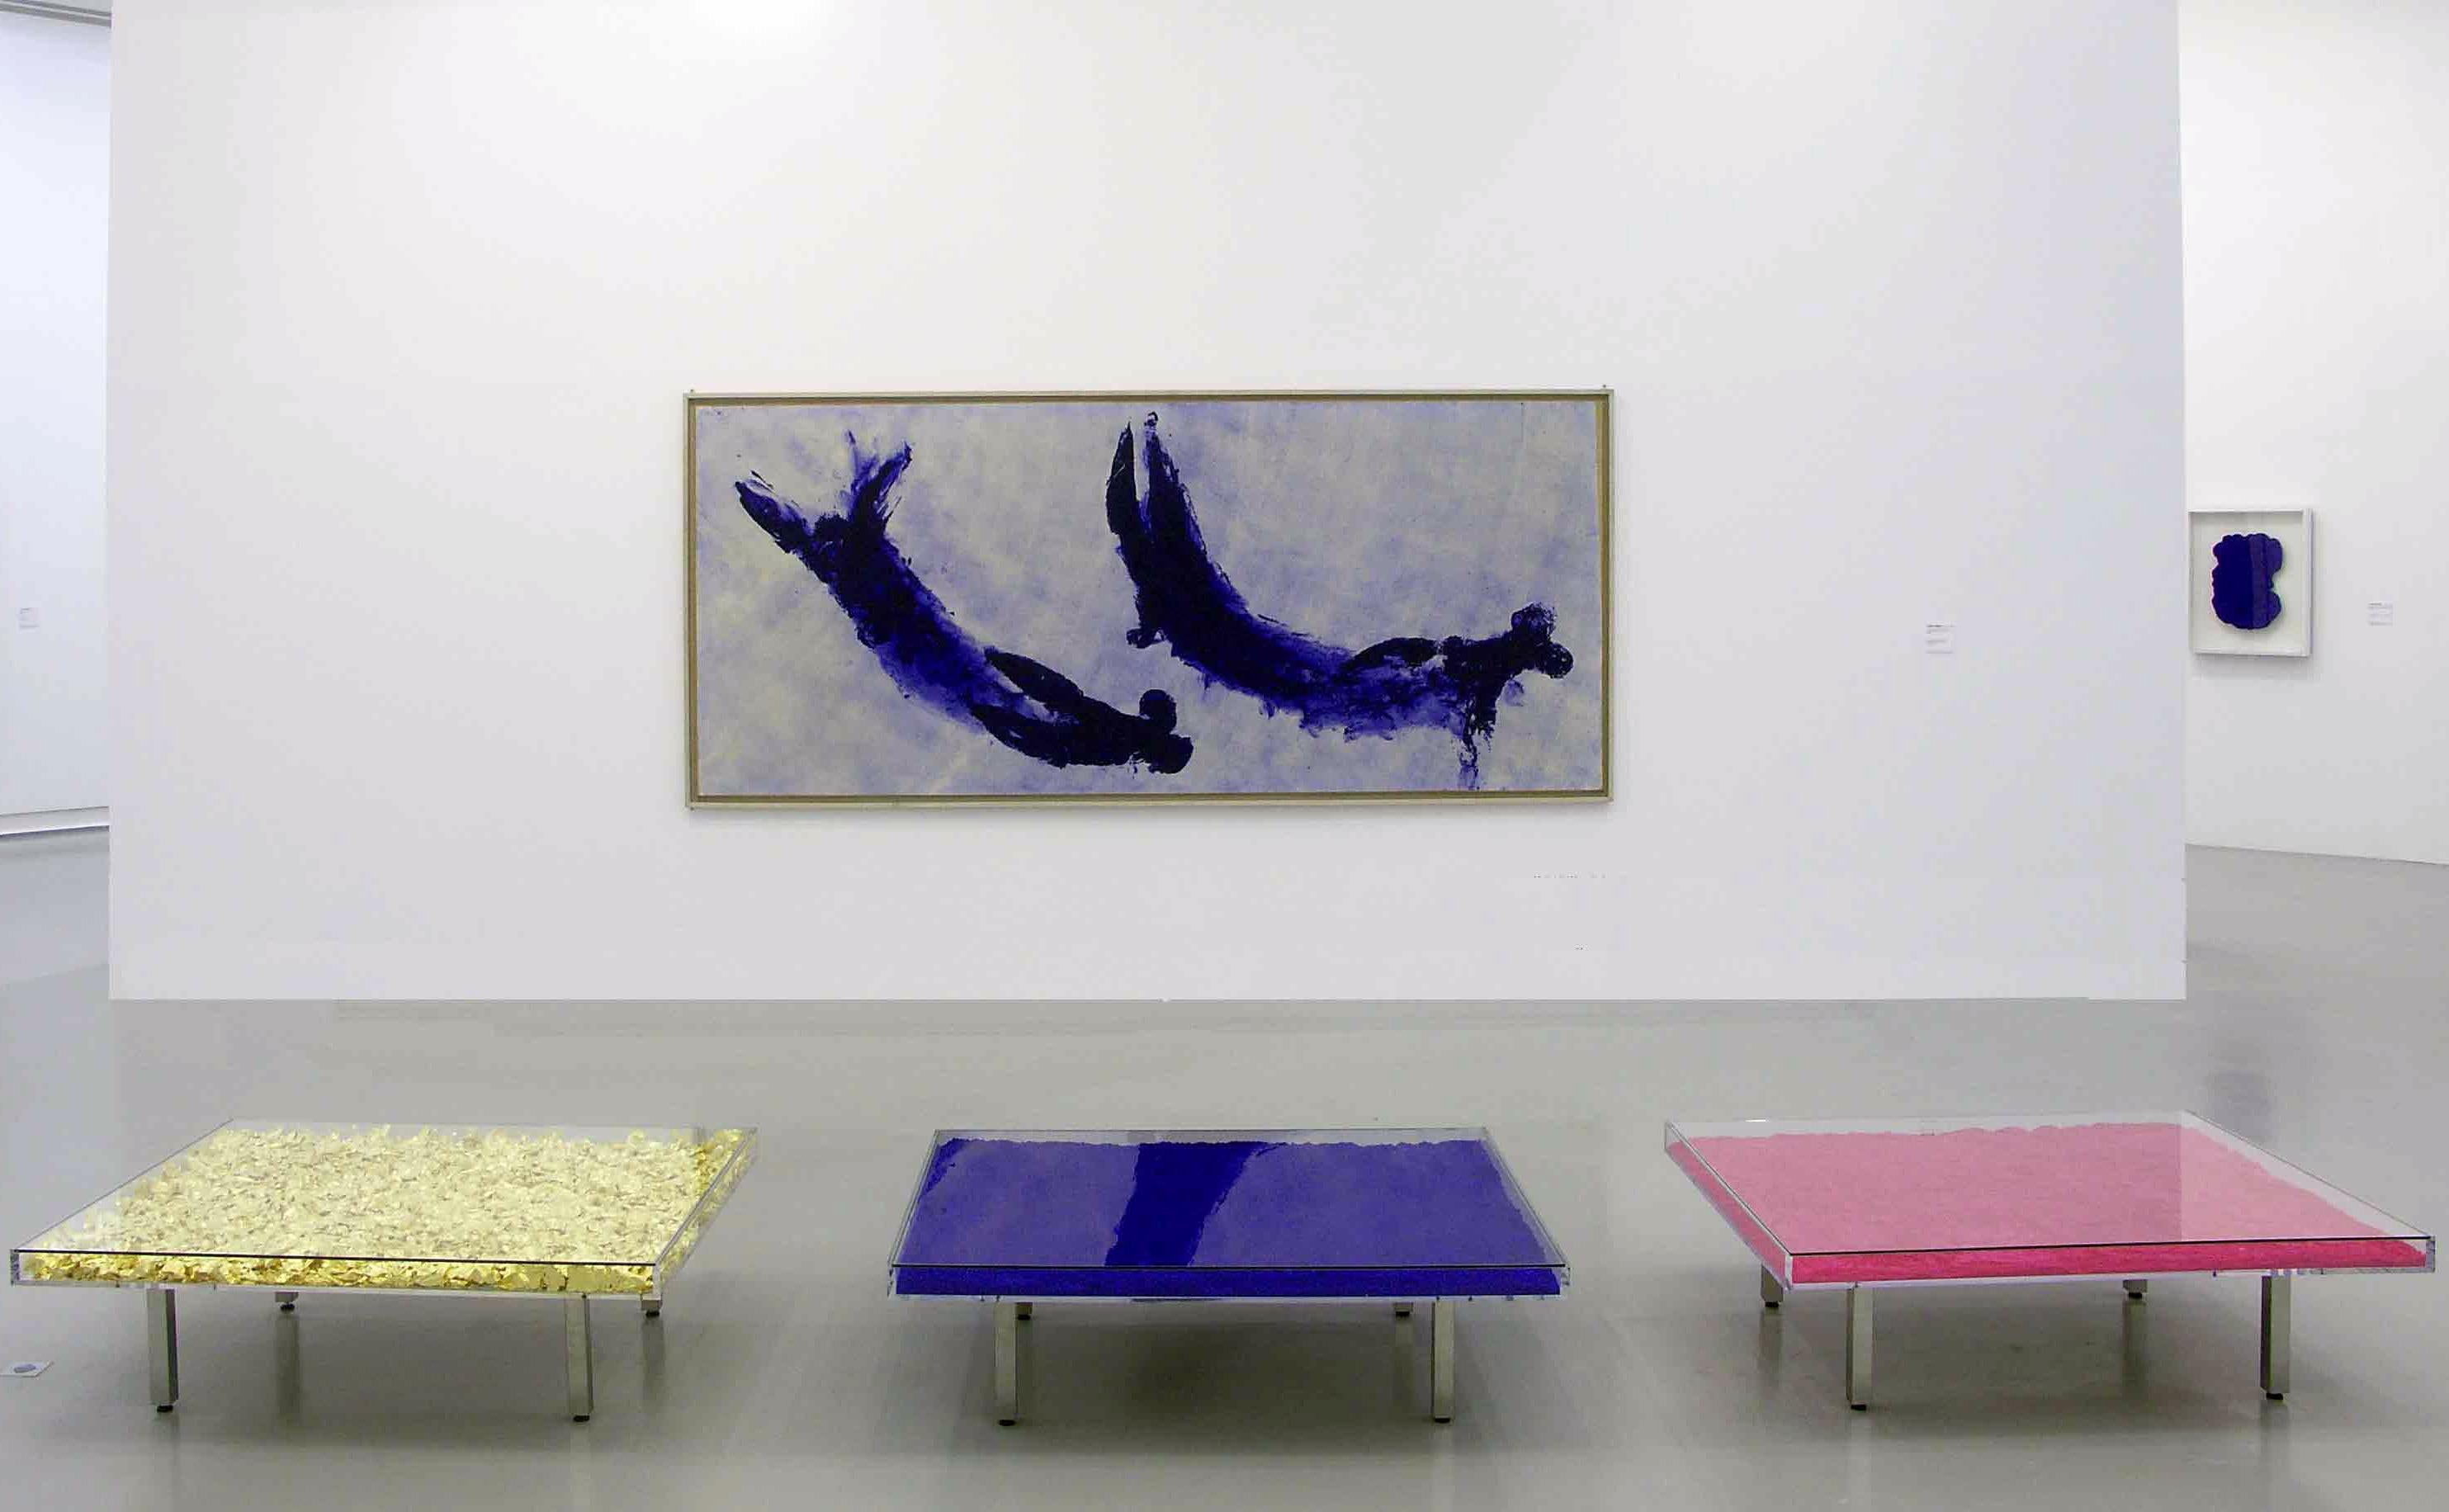 This work is from an edition begun in 1963, under the supervision of Rotraut Klein-Moquay, France, based on a 1961 model by Yves Klein. The table is accompanied with a signed and numbered placard of authenticity. 

Yves Klein 
Monopink